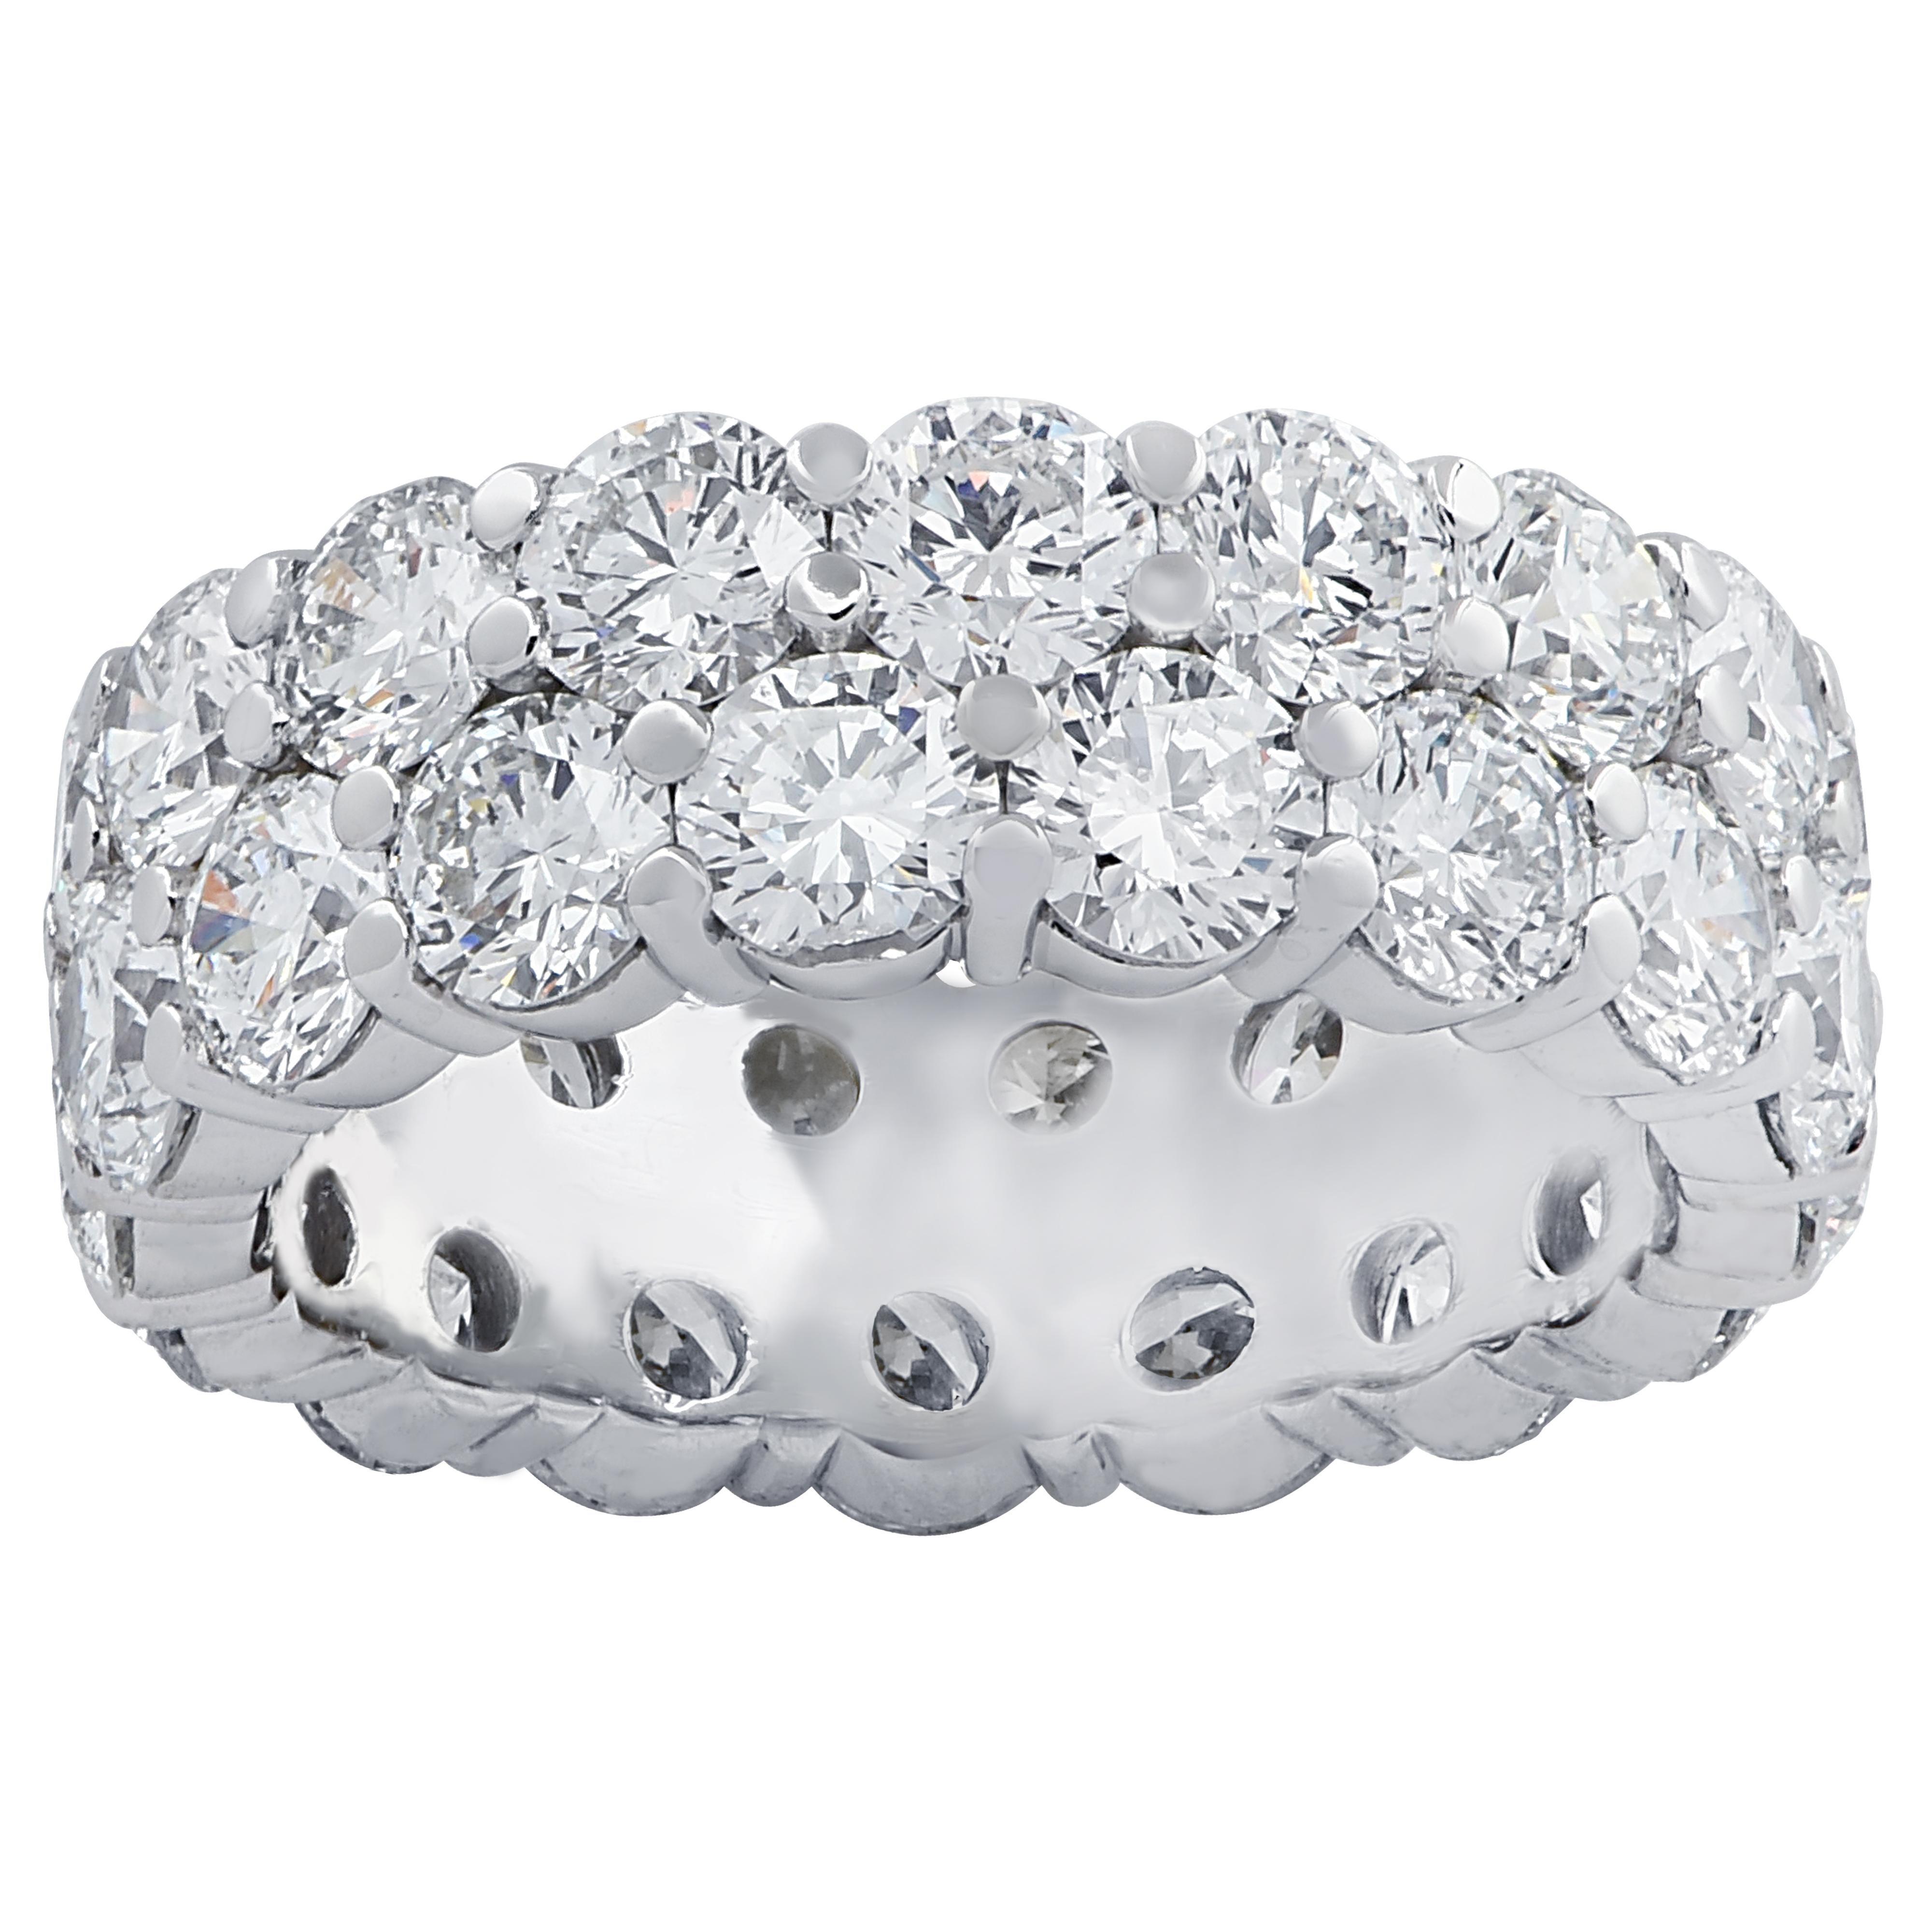 Exquisite eternity band crafted in Platinum, showcasing 34 stunning round brilliant cut diamonds weighing 8.25 carats total, G color, VS clarity. The diamonds are set in two rows which fit together in a seamless sea of eternity, creating a